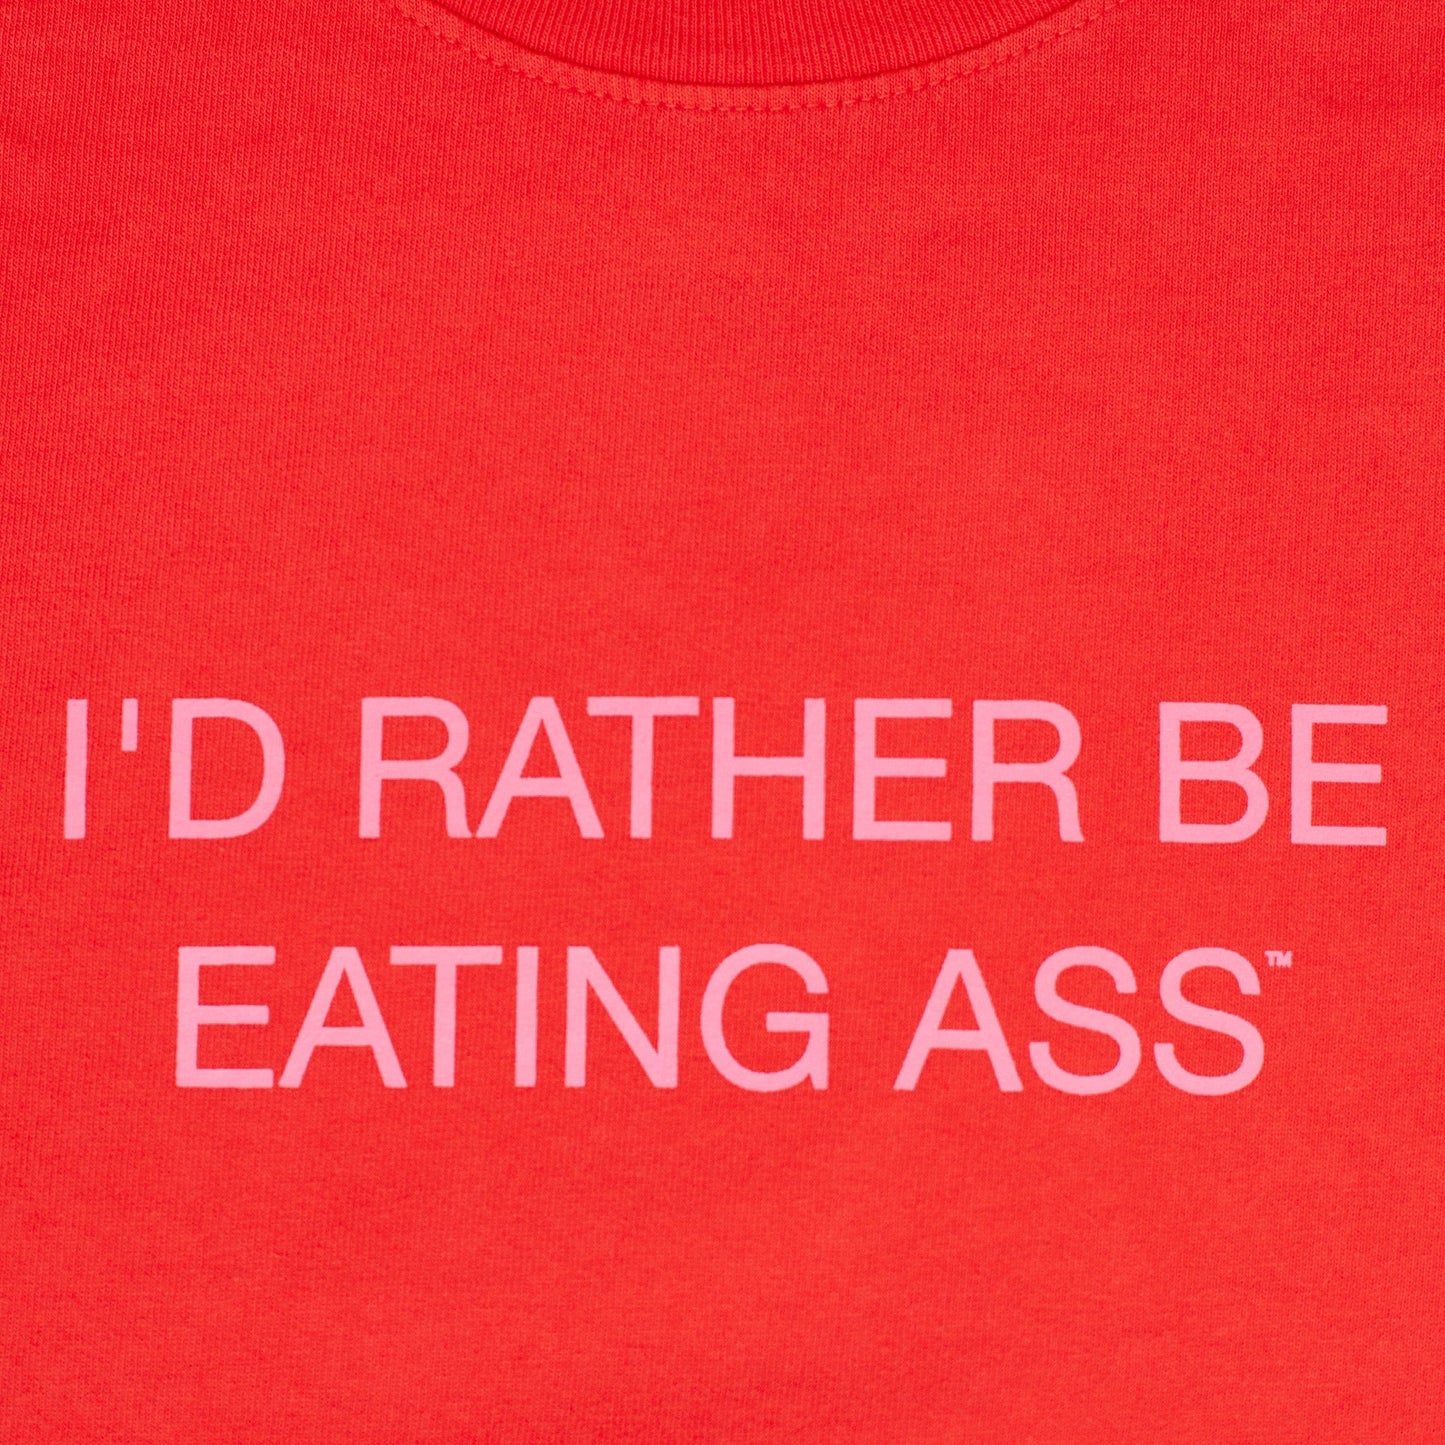 I'D RATHER BE EATING ASS OVERSIZED T-SHIRT - RED